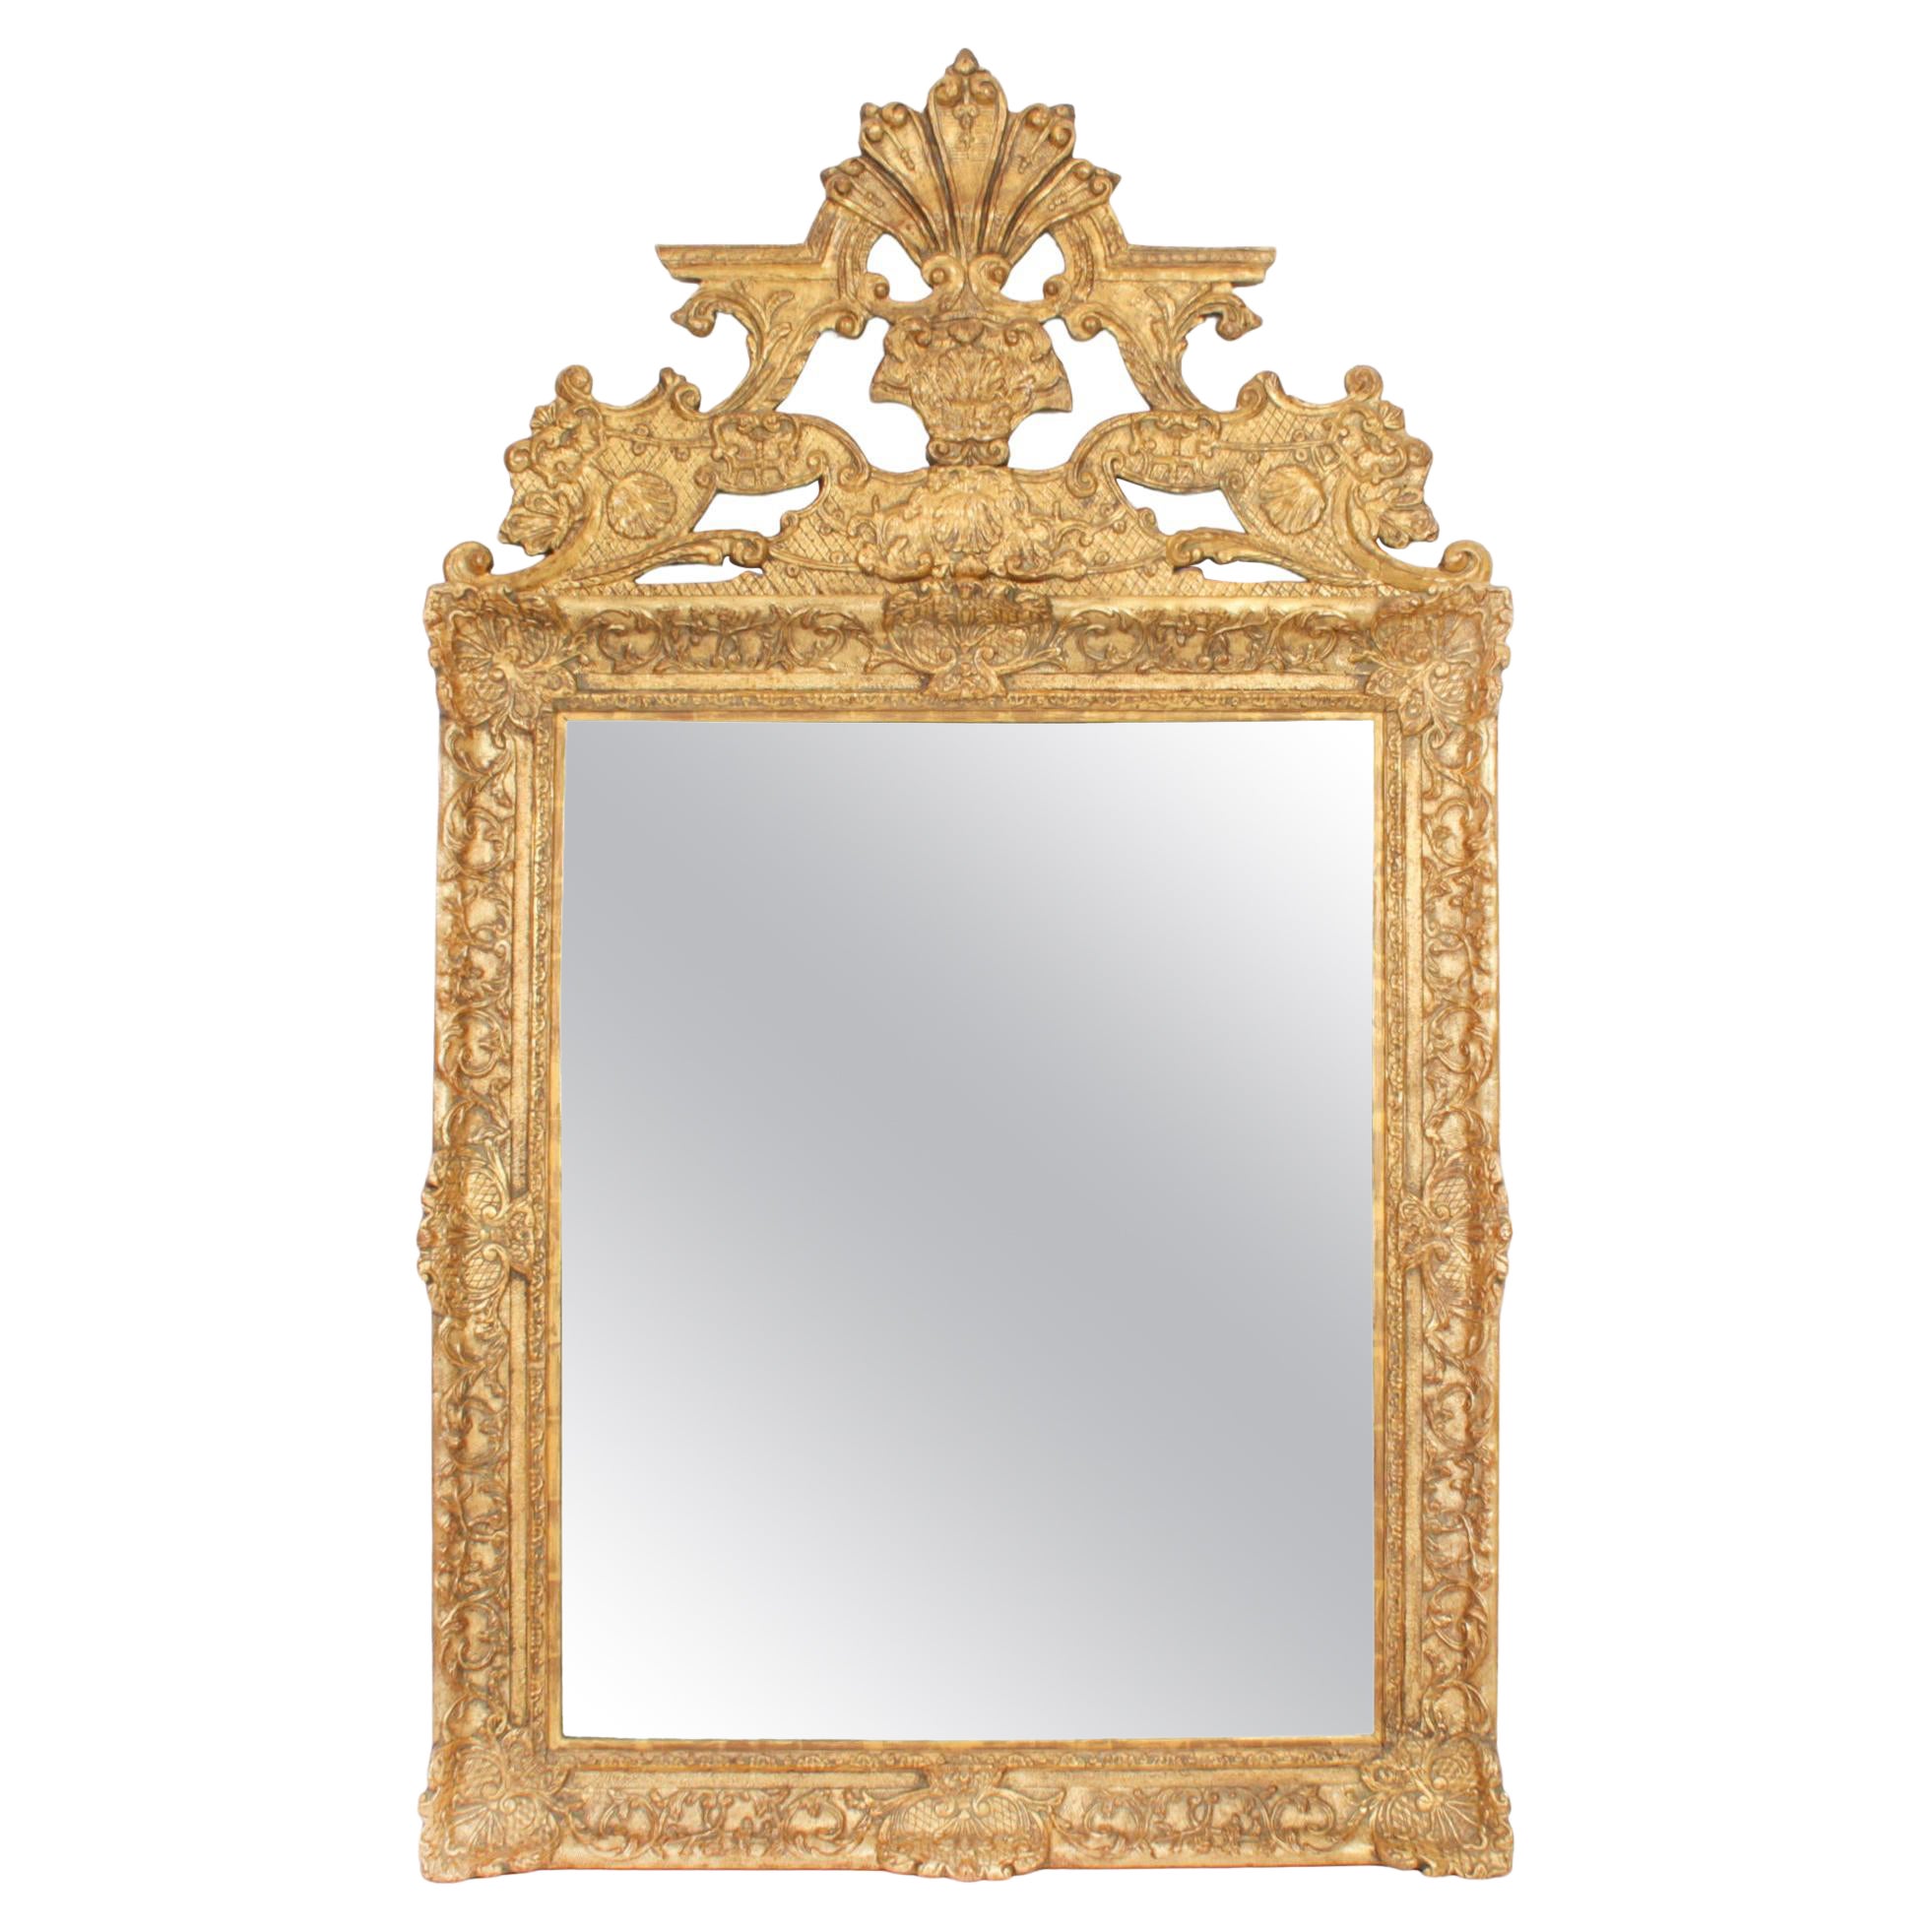 Antique Large French Giltwood Wall Mirror 18th Century - 171x101cm For Sale